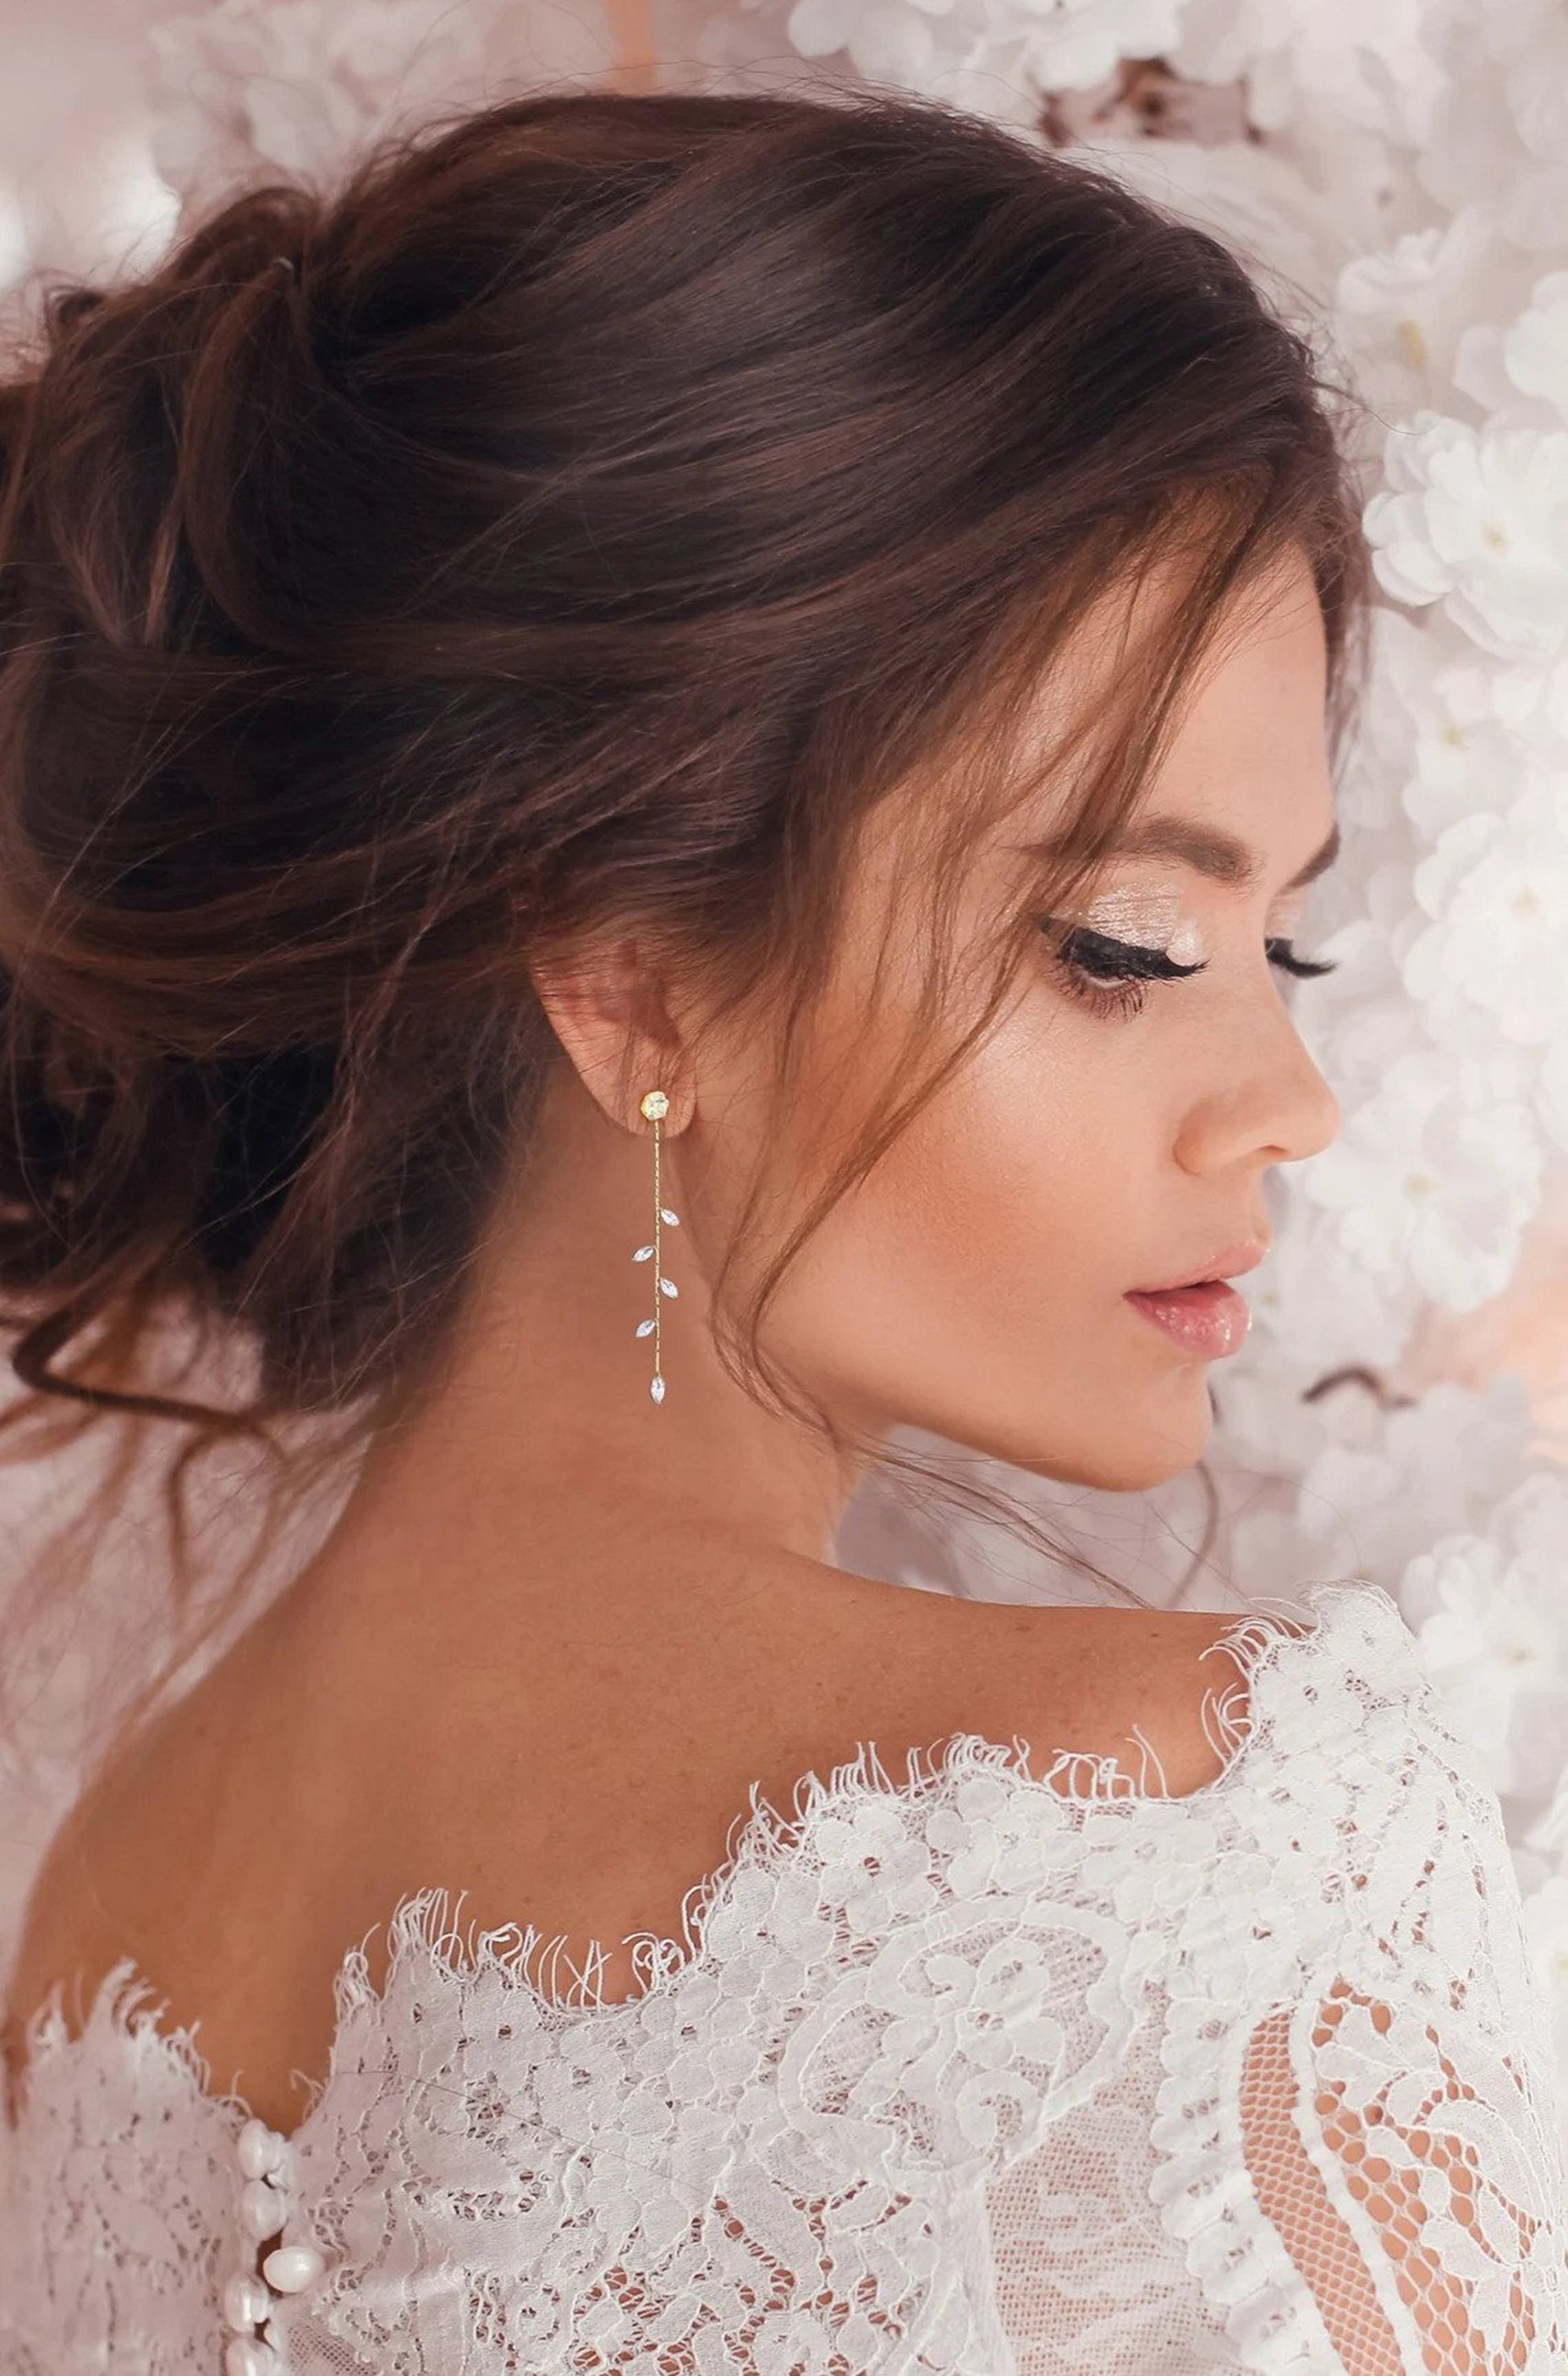 Bridal Earrings: 5 Top Styles For Every Bride